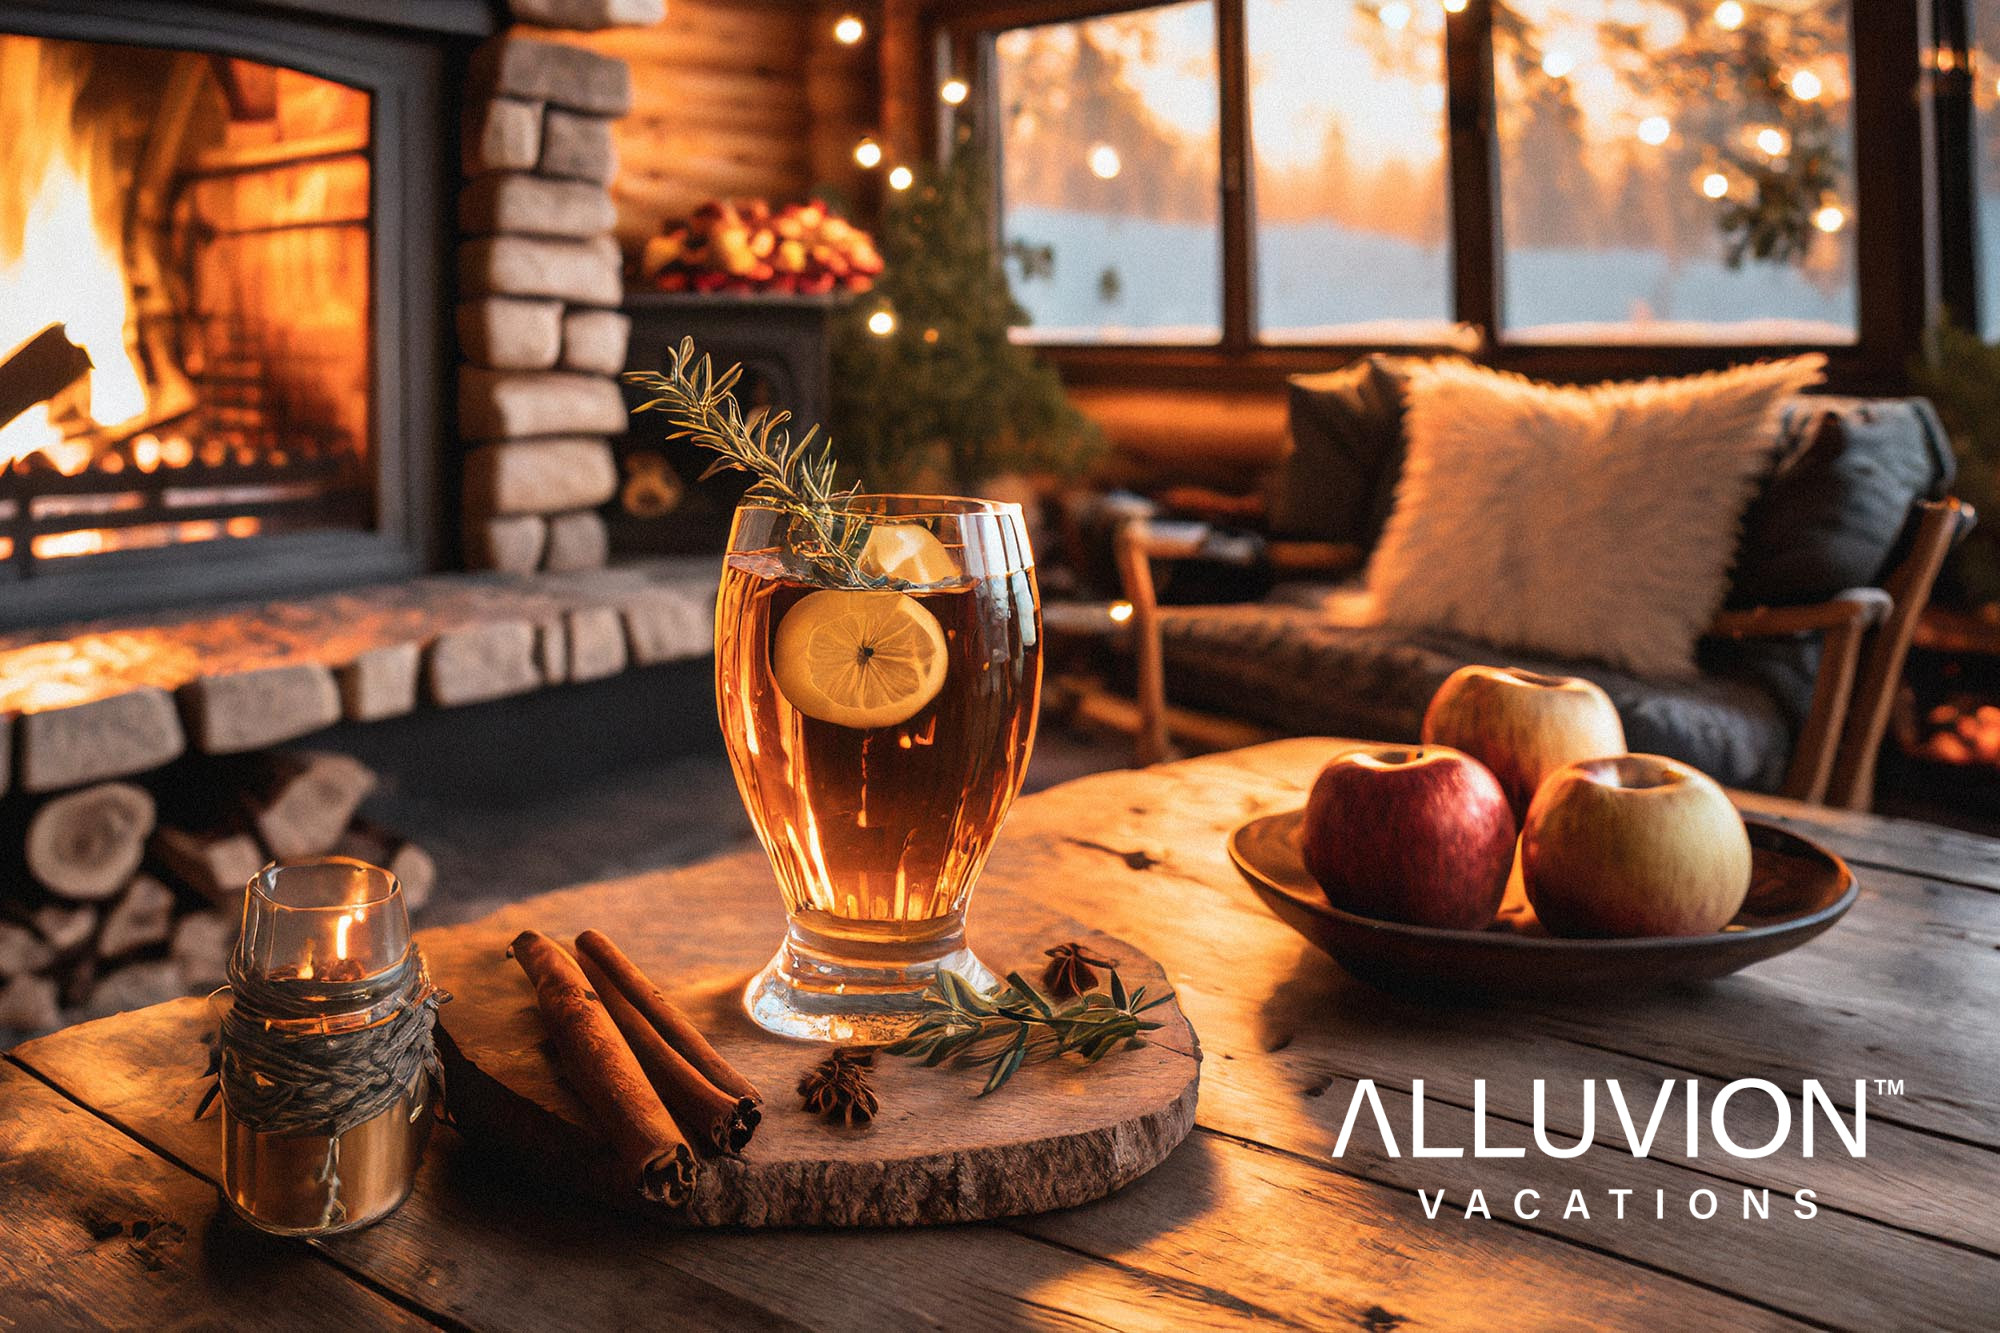 Discover Inclusive and Rejuvenating Getaways with Alluvion Vacations: Pioneering LGBTQ Travel in Upstate New York